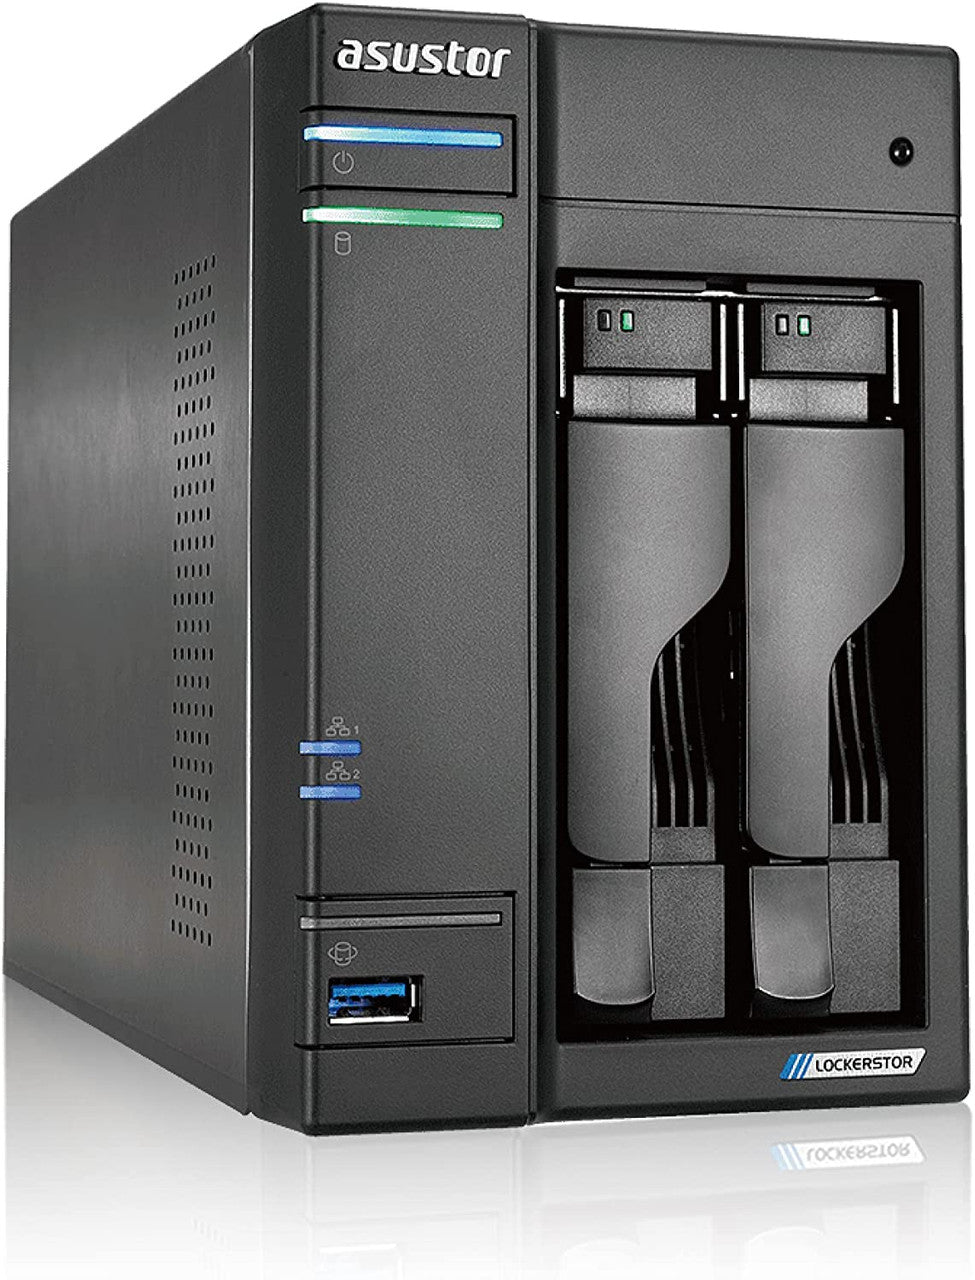 Asustor AS6602T 2-Bay Lockerstor 2 NAS with 4GB RAM and 20TB (2x10TB) Seagate Ironwolf NAS Drives